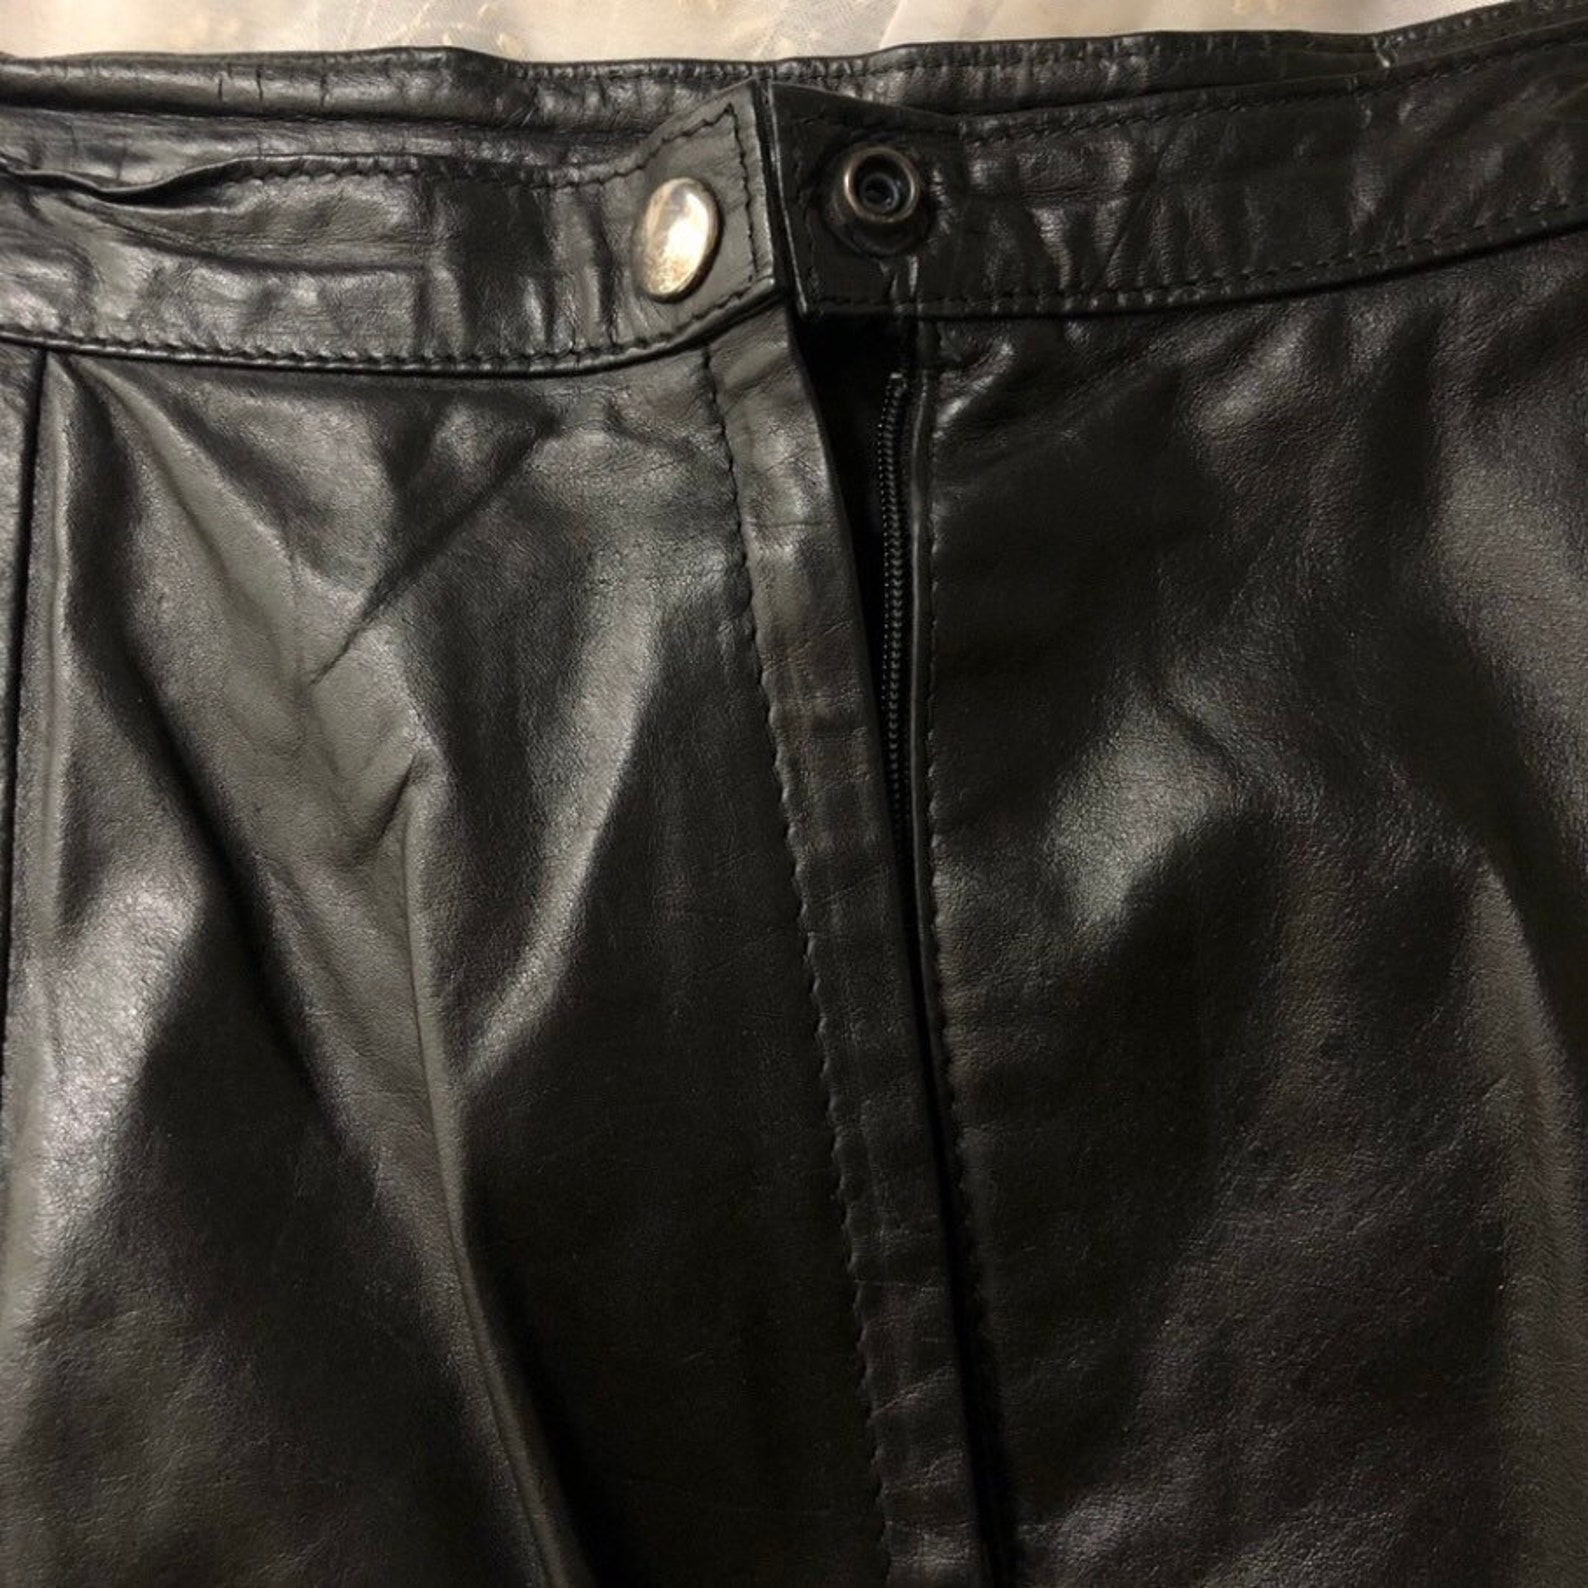 Vintage High Waisted Black Leather Pencil Skirt Size S | Etsy